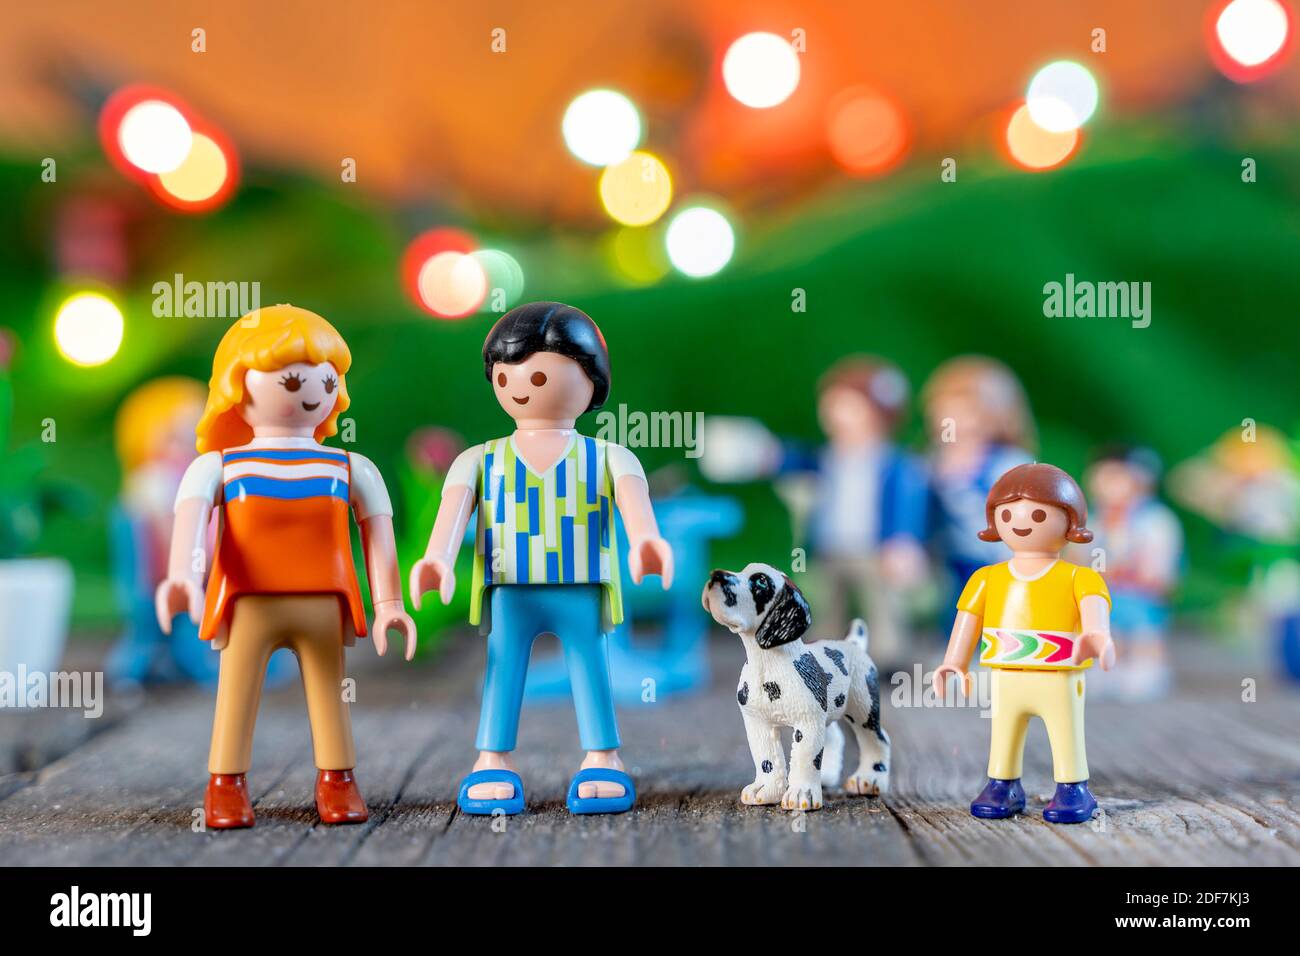 Playmobil Family High Resolution Stock Photography and Images - Alamy